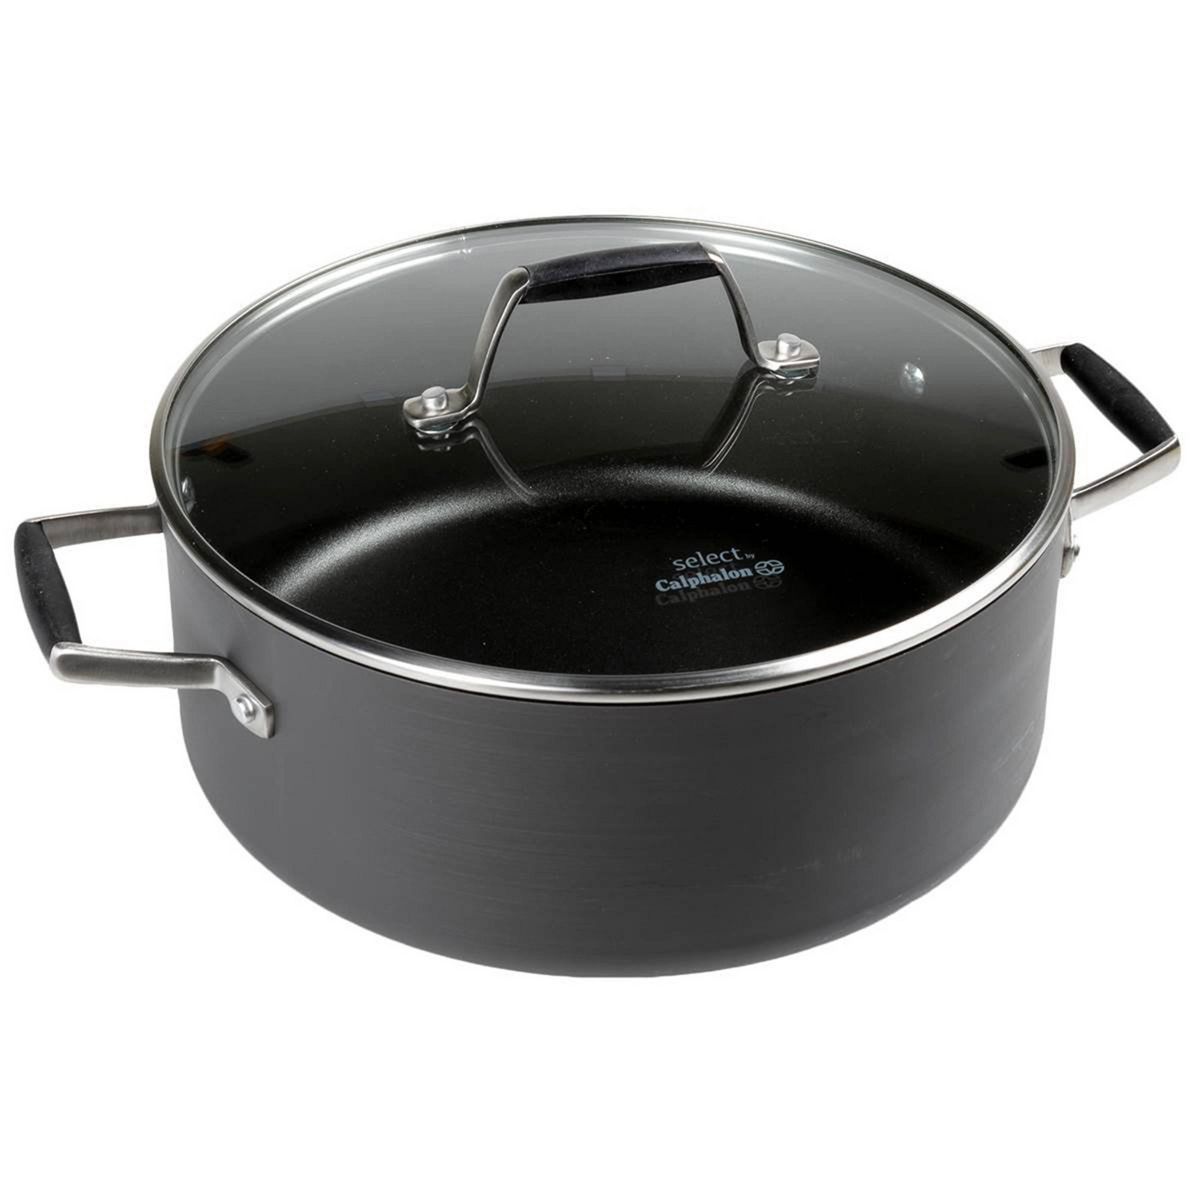 Select by Calphalon Nonstick with AquaShield 5qt Dutch Oven with Lid | Target